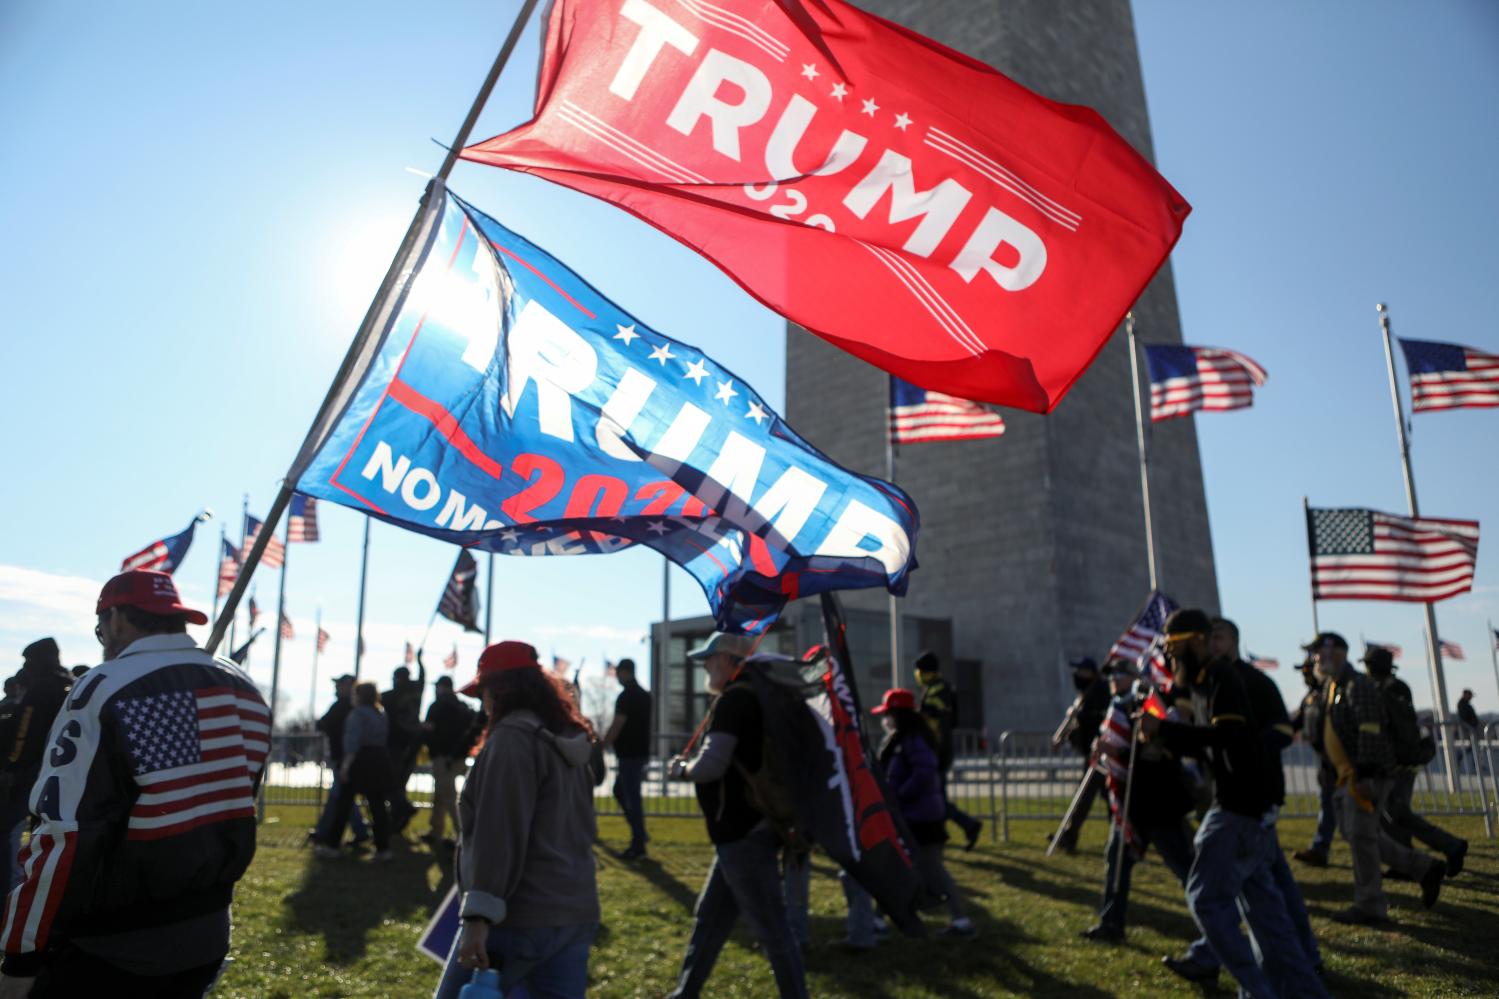 A man holds flags as supporters of U.S. President Donald Trump along with members of the far-right group Proud Boys walk past a Washington Monument during a rally to protest the results of the election, in Washington, U.S., December 12, 2020. REUTERS/Jim Urquhart